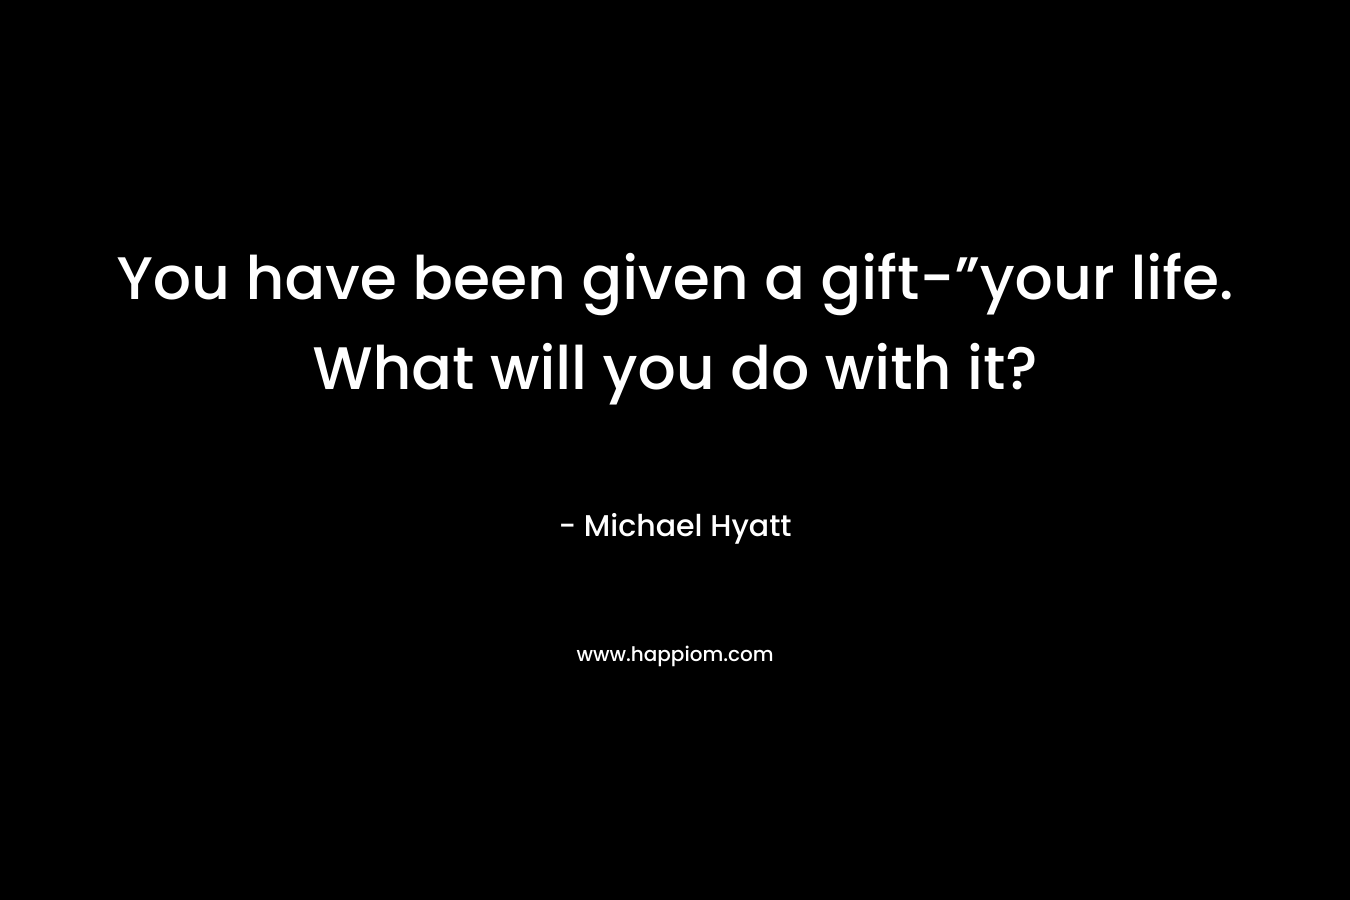 You have been given a gift-”your life. What will you do with it?